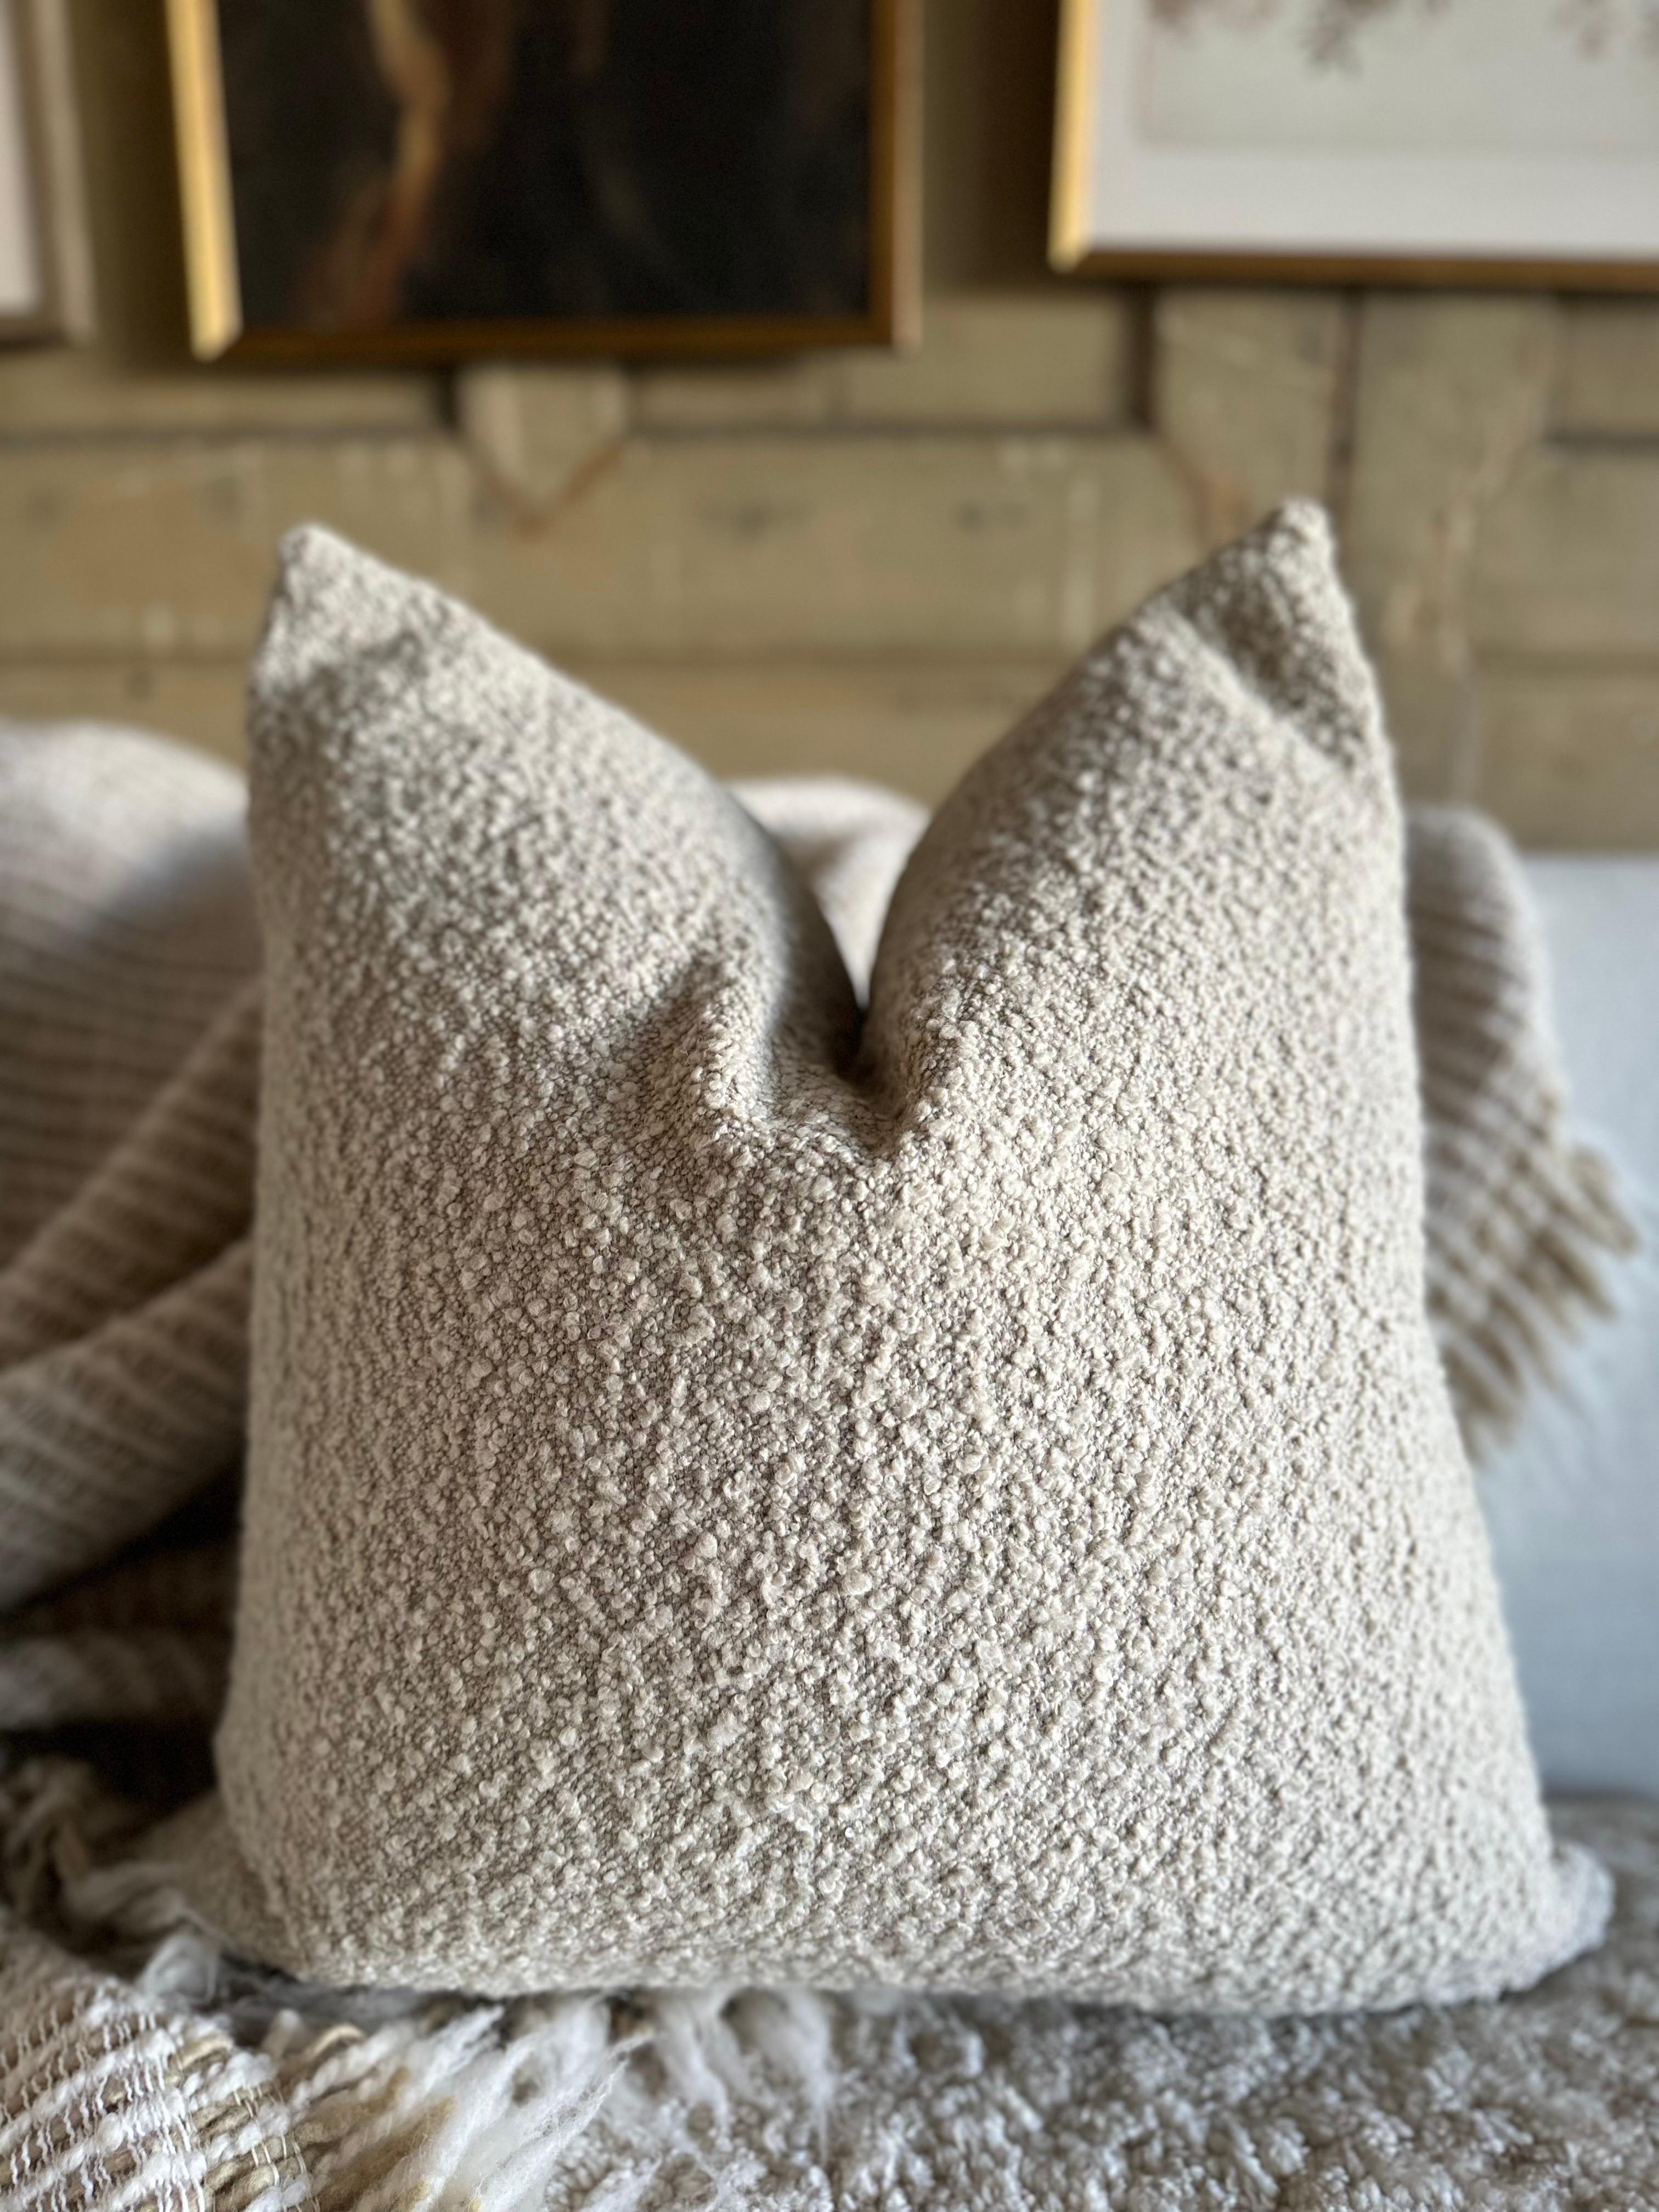 A luxurious wooly bouclette face with stone washed linen back.
Linen & boucle fabric is imported from France.
Custom made to order, can be customized to your size.
Color: Natural
Antique brass zipper
Size 22x22
Includes Down Feather Insert
Care: Can